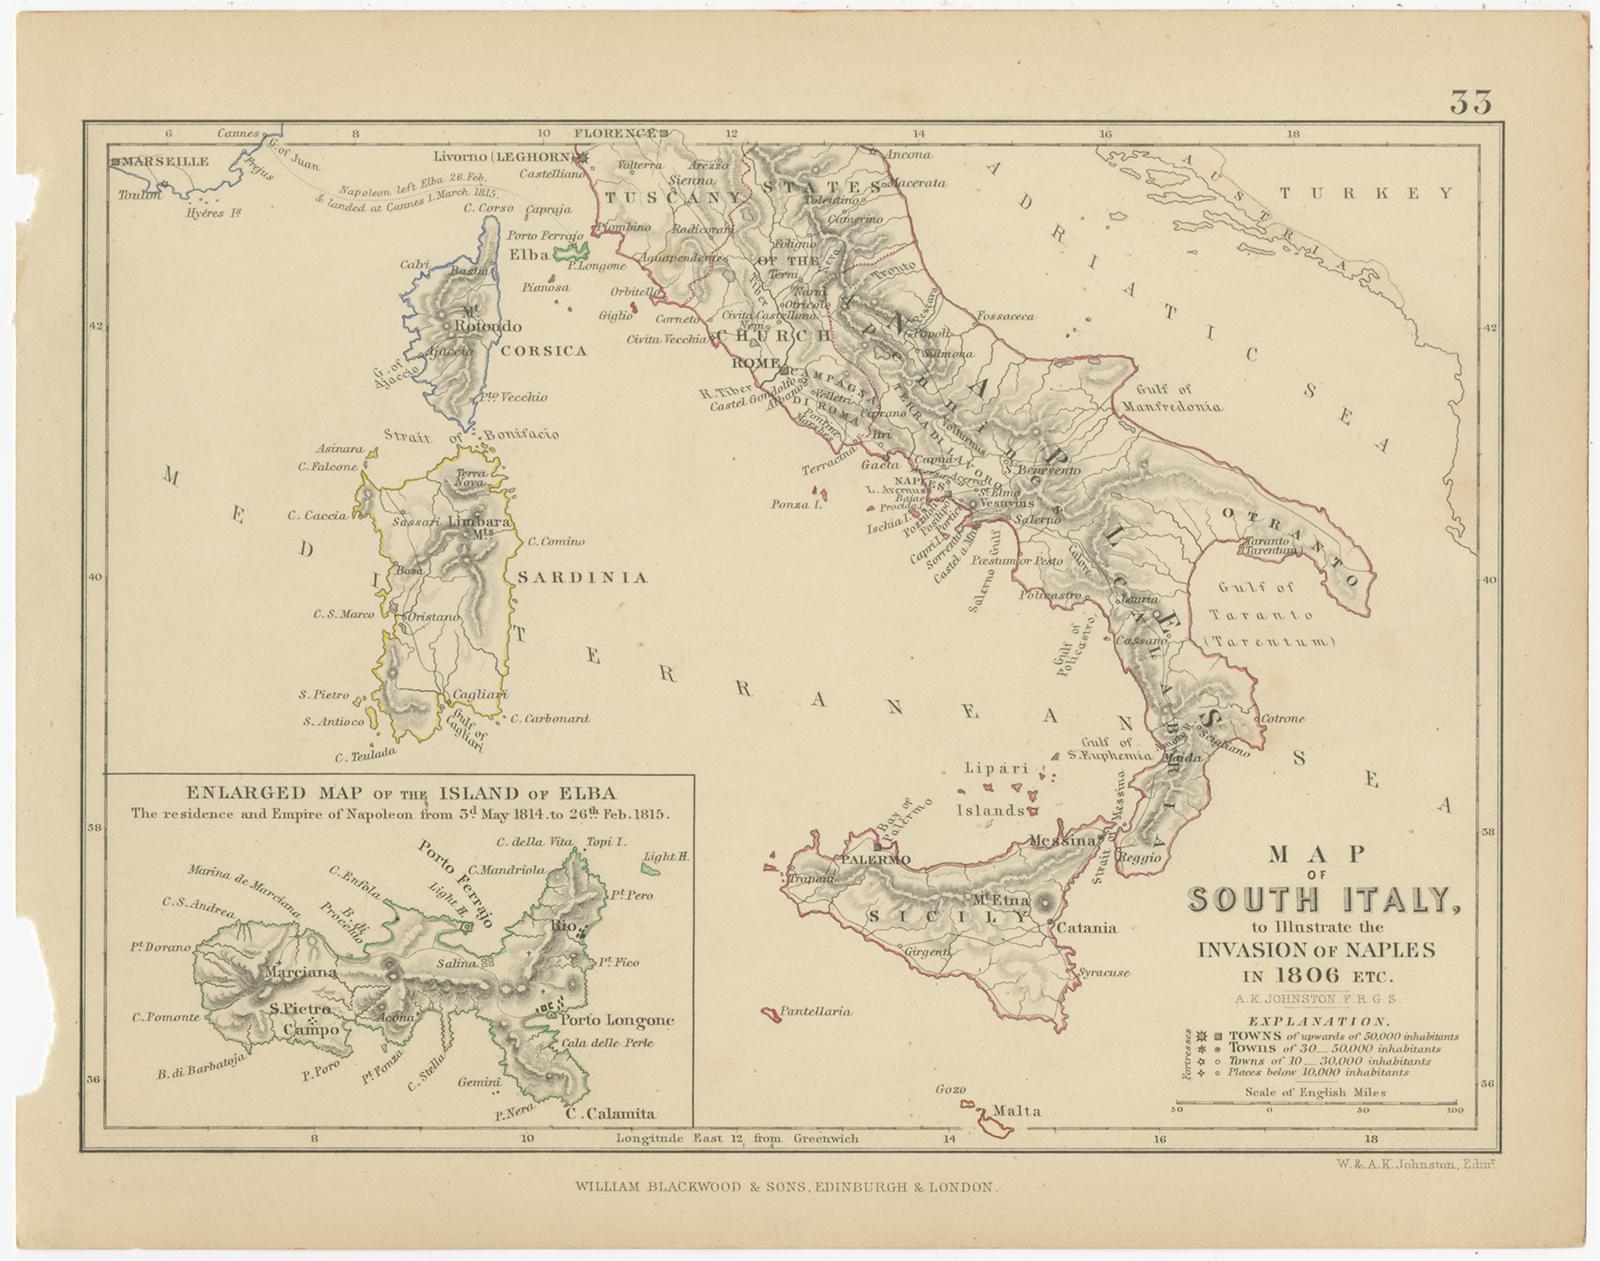 Antique battle map titled 'Map of South Italy, to illustrate the invasion of Naples in 1806 etc'. Map of South Italy illustrating the invasion of Naples. With inset map of the island of Elba. This print originates from 'Atlas to Alison's history of